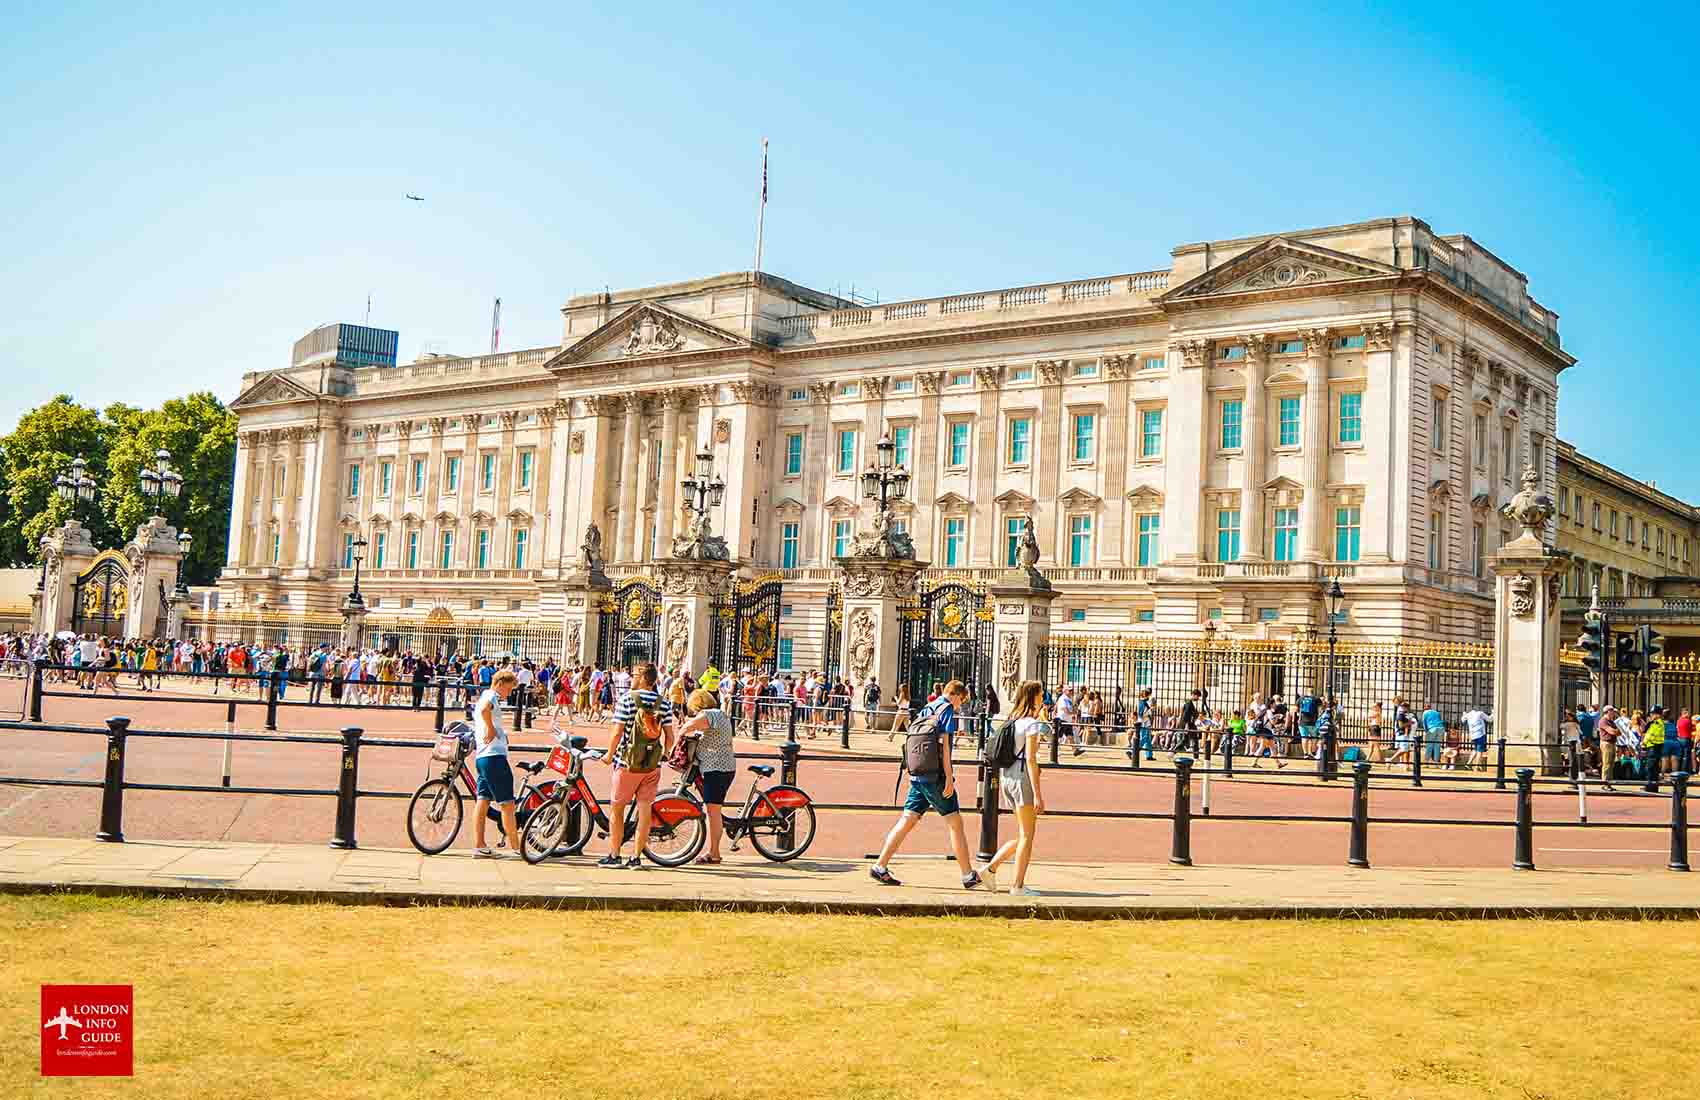 Find out what's happening when visiting London in September with our guide. Whether you're looking for cultural festivals or outdoor activities, we can help.